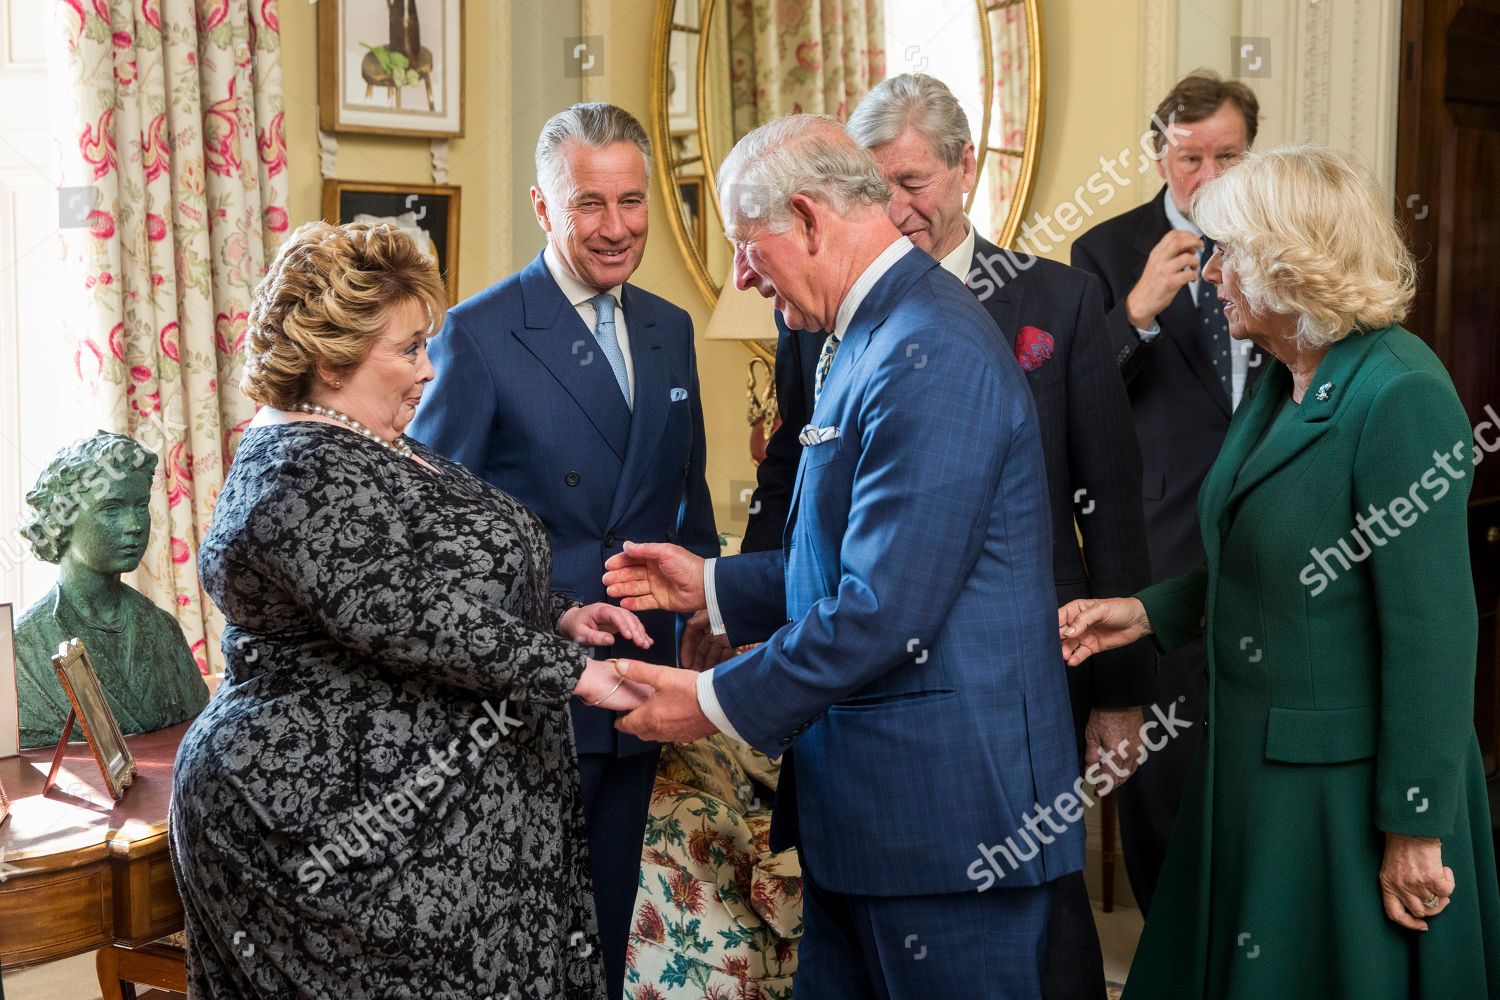 prince-charles-and-camilla-duchess-of-cornwall-visit-to-northern-ireland-uk-shutterstock-editorial-10195512r.jpg